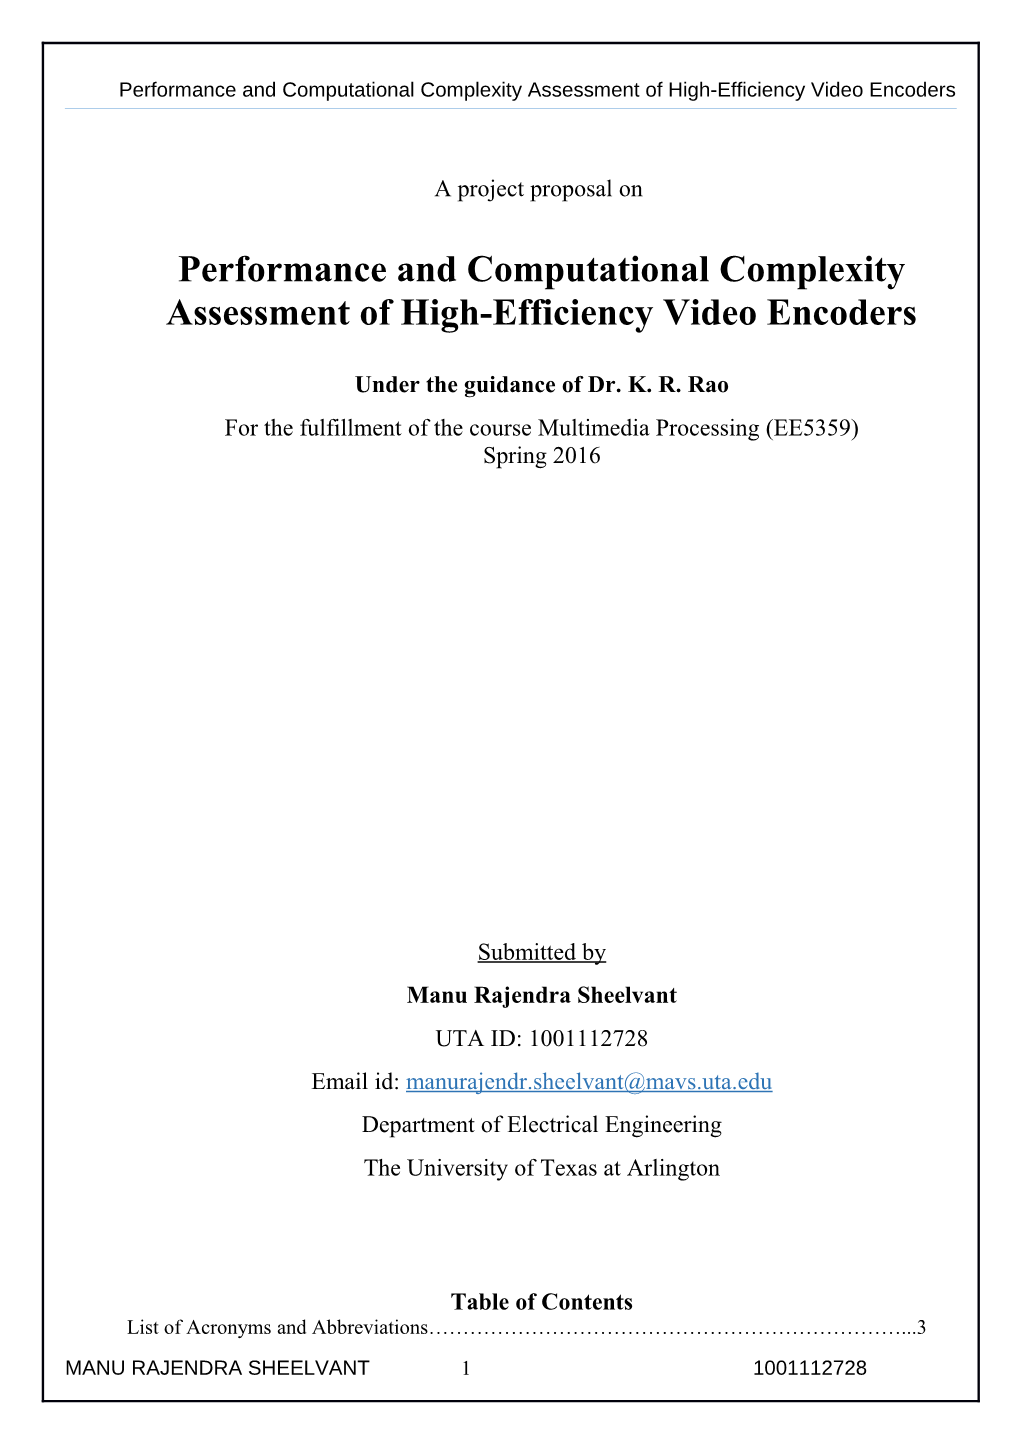 Performance and Computational Complexity Assessment of High-Efficiency Video Encoders